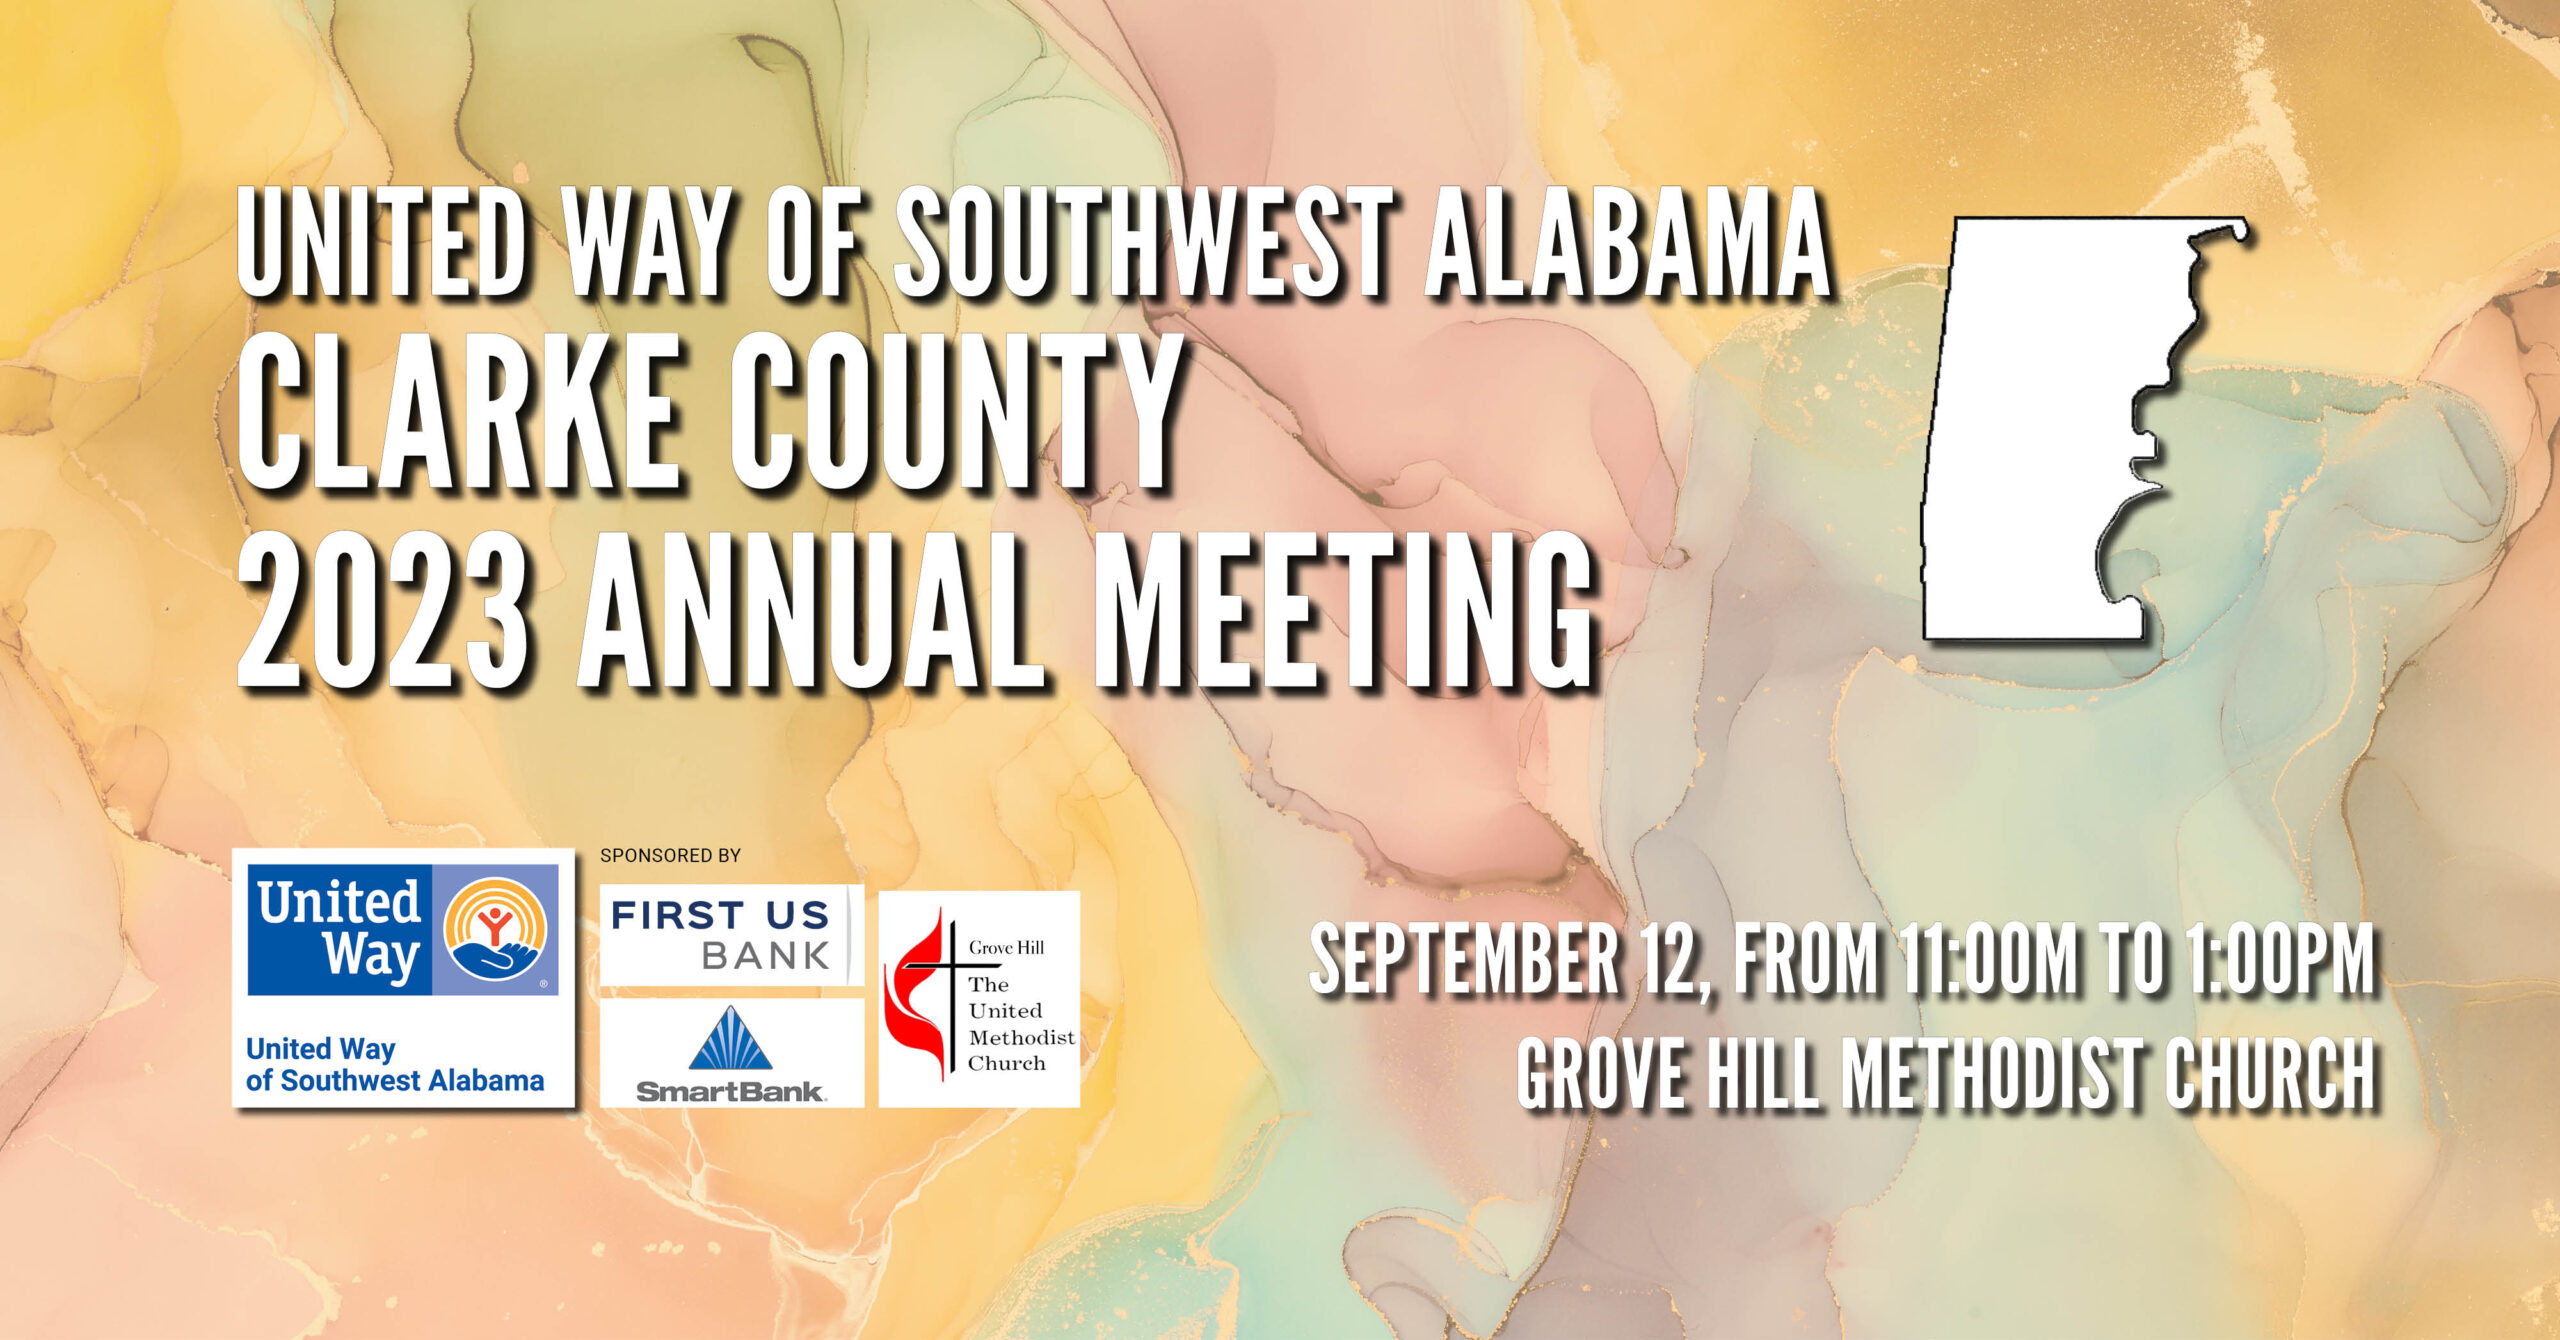 United Way of Southwest Alabama Clarke County 2023 Annual Meeting. September 12, from 11AM to 1PM at Grove Hill UMC. Sponsors: First US Bank, SmartBank, and Grove Hill UMC.